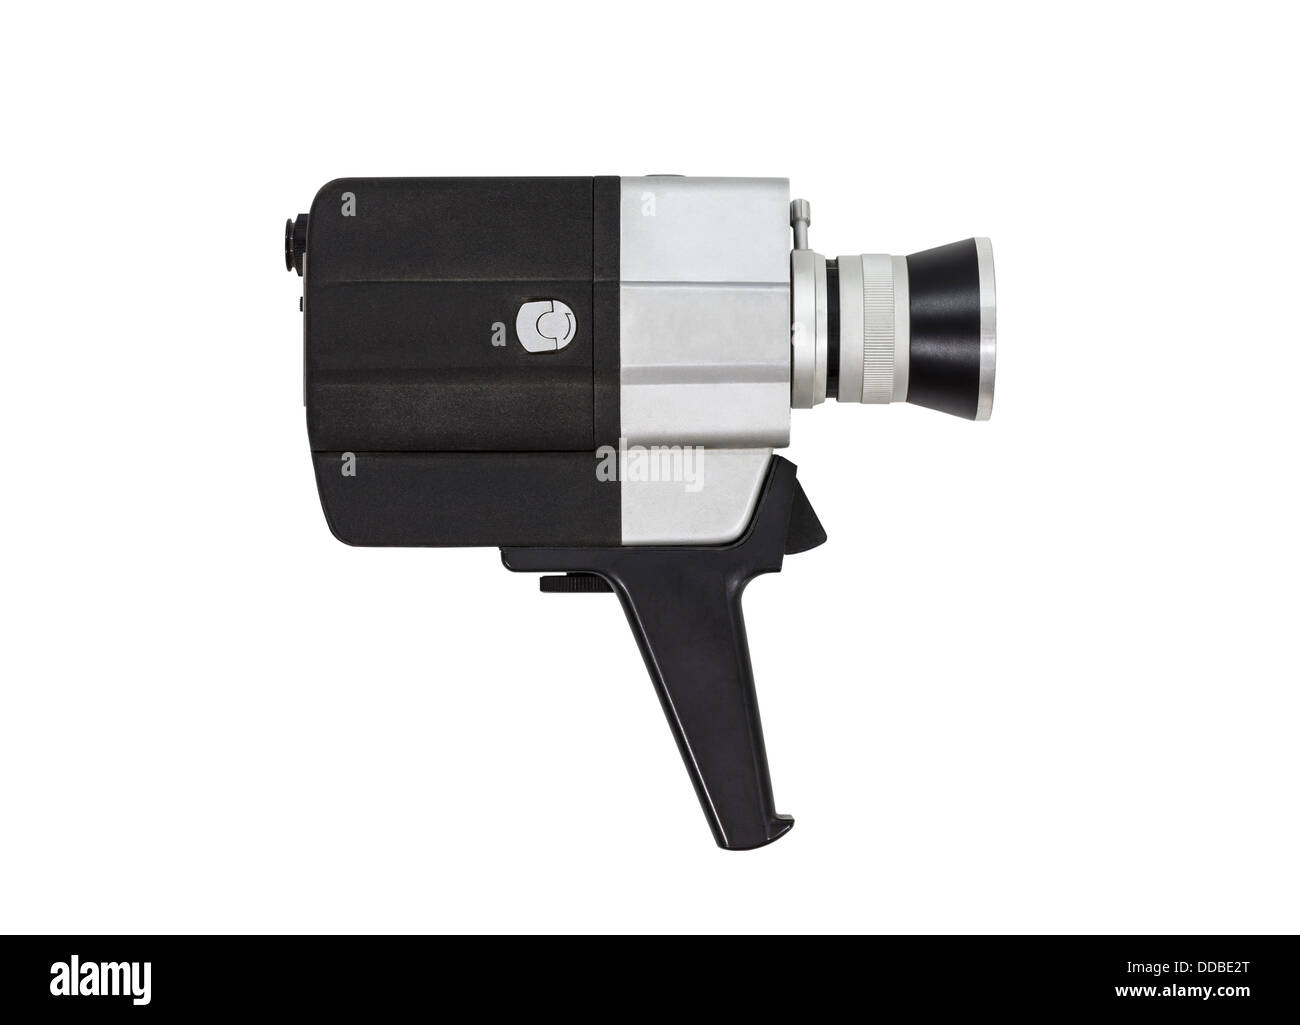 Vintage super 8 film camera with all text and markings removed, isolated with clipping path. Stock Photo